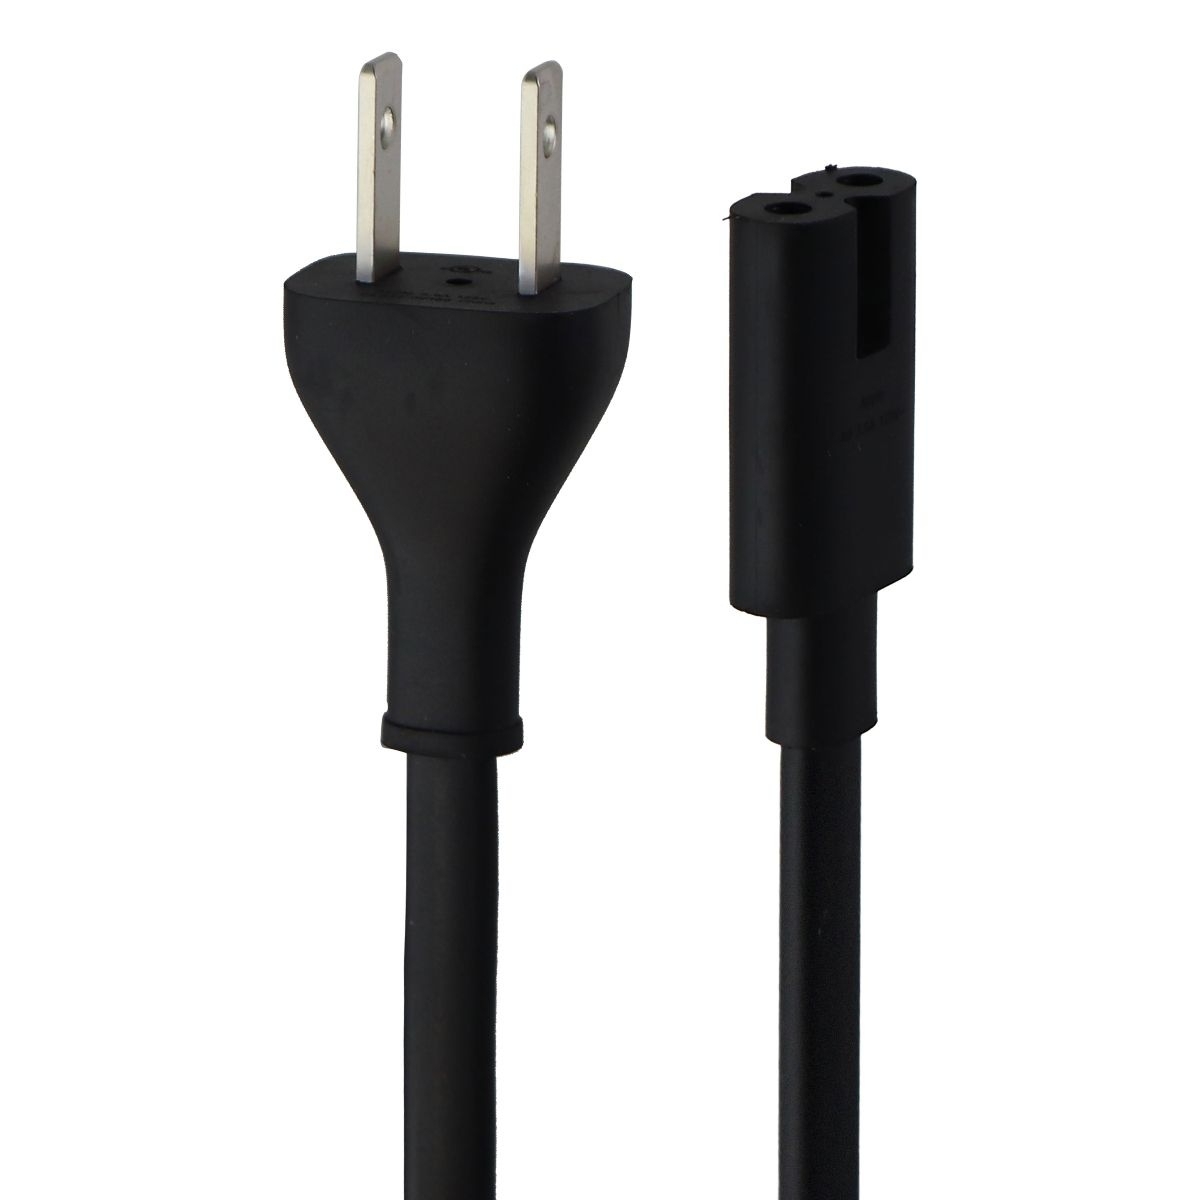 A9 Power Supply Connection Cable For Apple Devices (2.5A / 125V) - Black